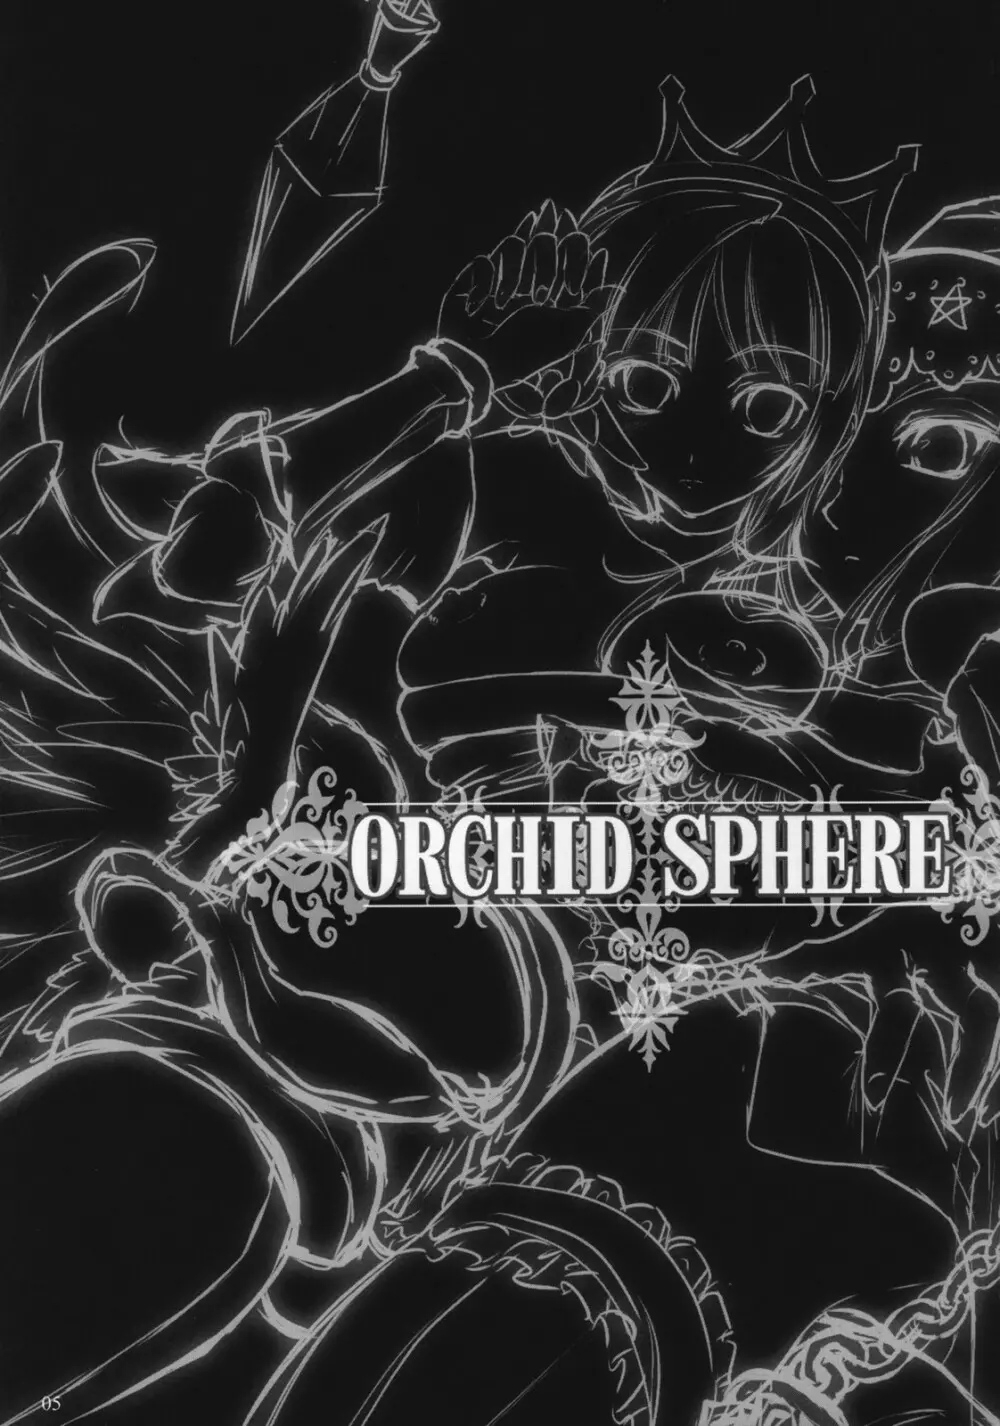 ORCHID SPHERE 4ページ